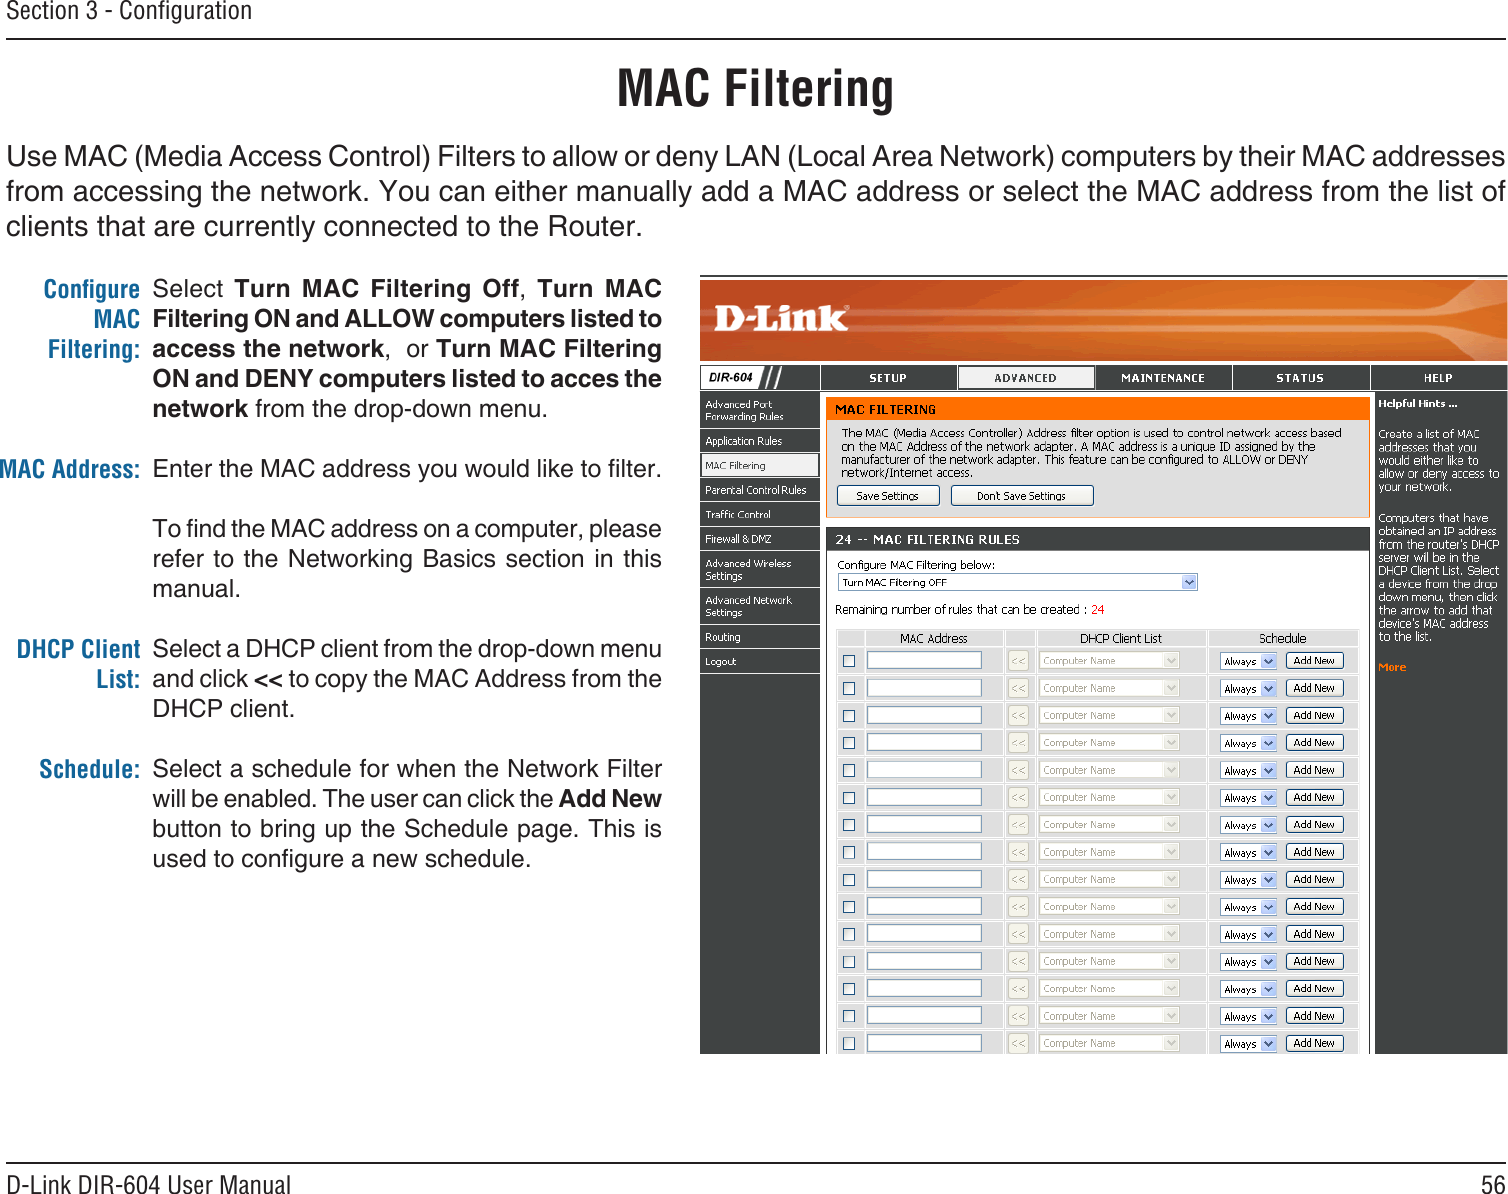 56D-Link DIR-604 User ManualSection 3 - ConﬁgurationMAC FilteringSelect  Turn  MAC  Filtering  Off,  Turn  MAC Filtering ON and ALLOW computers listed to access the network,  or Turn MAC Filtering ON and DENY computers listed to acces the network from the drop-down menu. Enter the MAC address you would like to lter.To nd the MAC address on a computer, please refer to the Networking Basics section in this manual. Select a DHCP client from the drop-down menu and click &lt;&lt; to copy the MAC Address from the DHCP client. Select a schedule for when the Network Filter will be enabled. The user can click the Add New button to bring up the Schedule page. This is used to congure a new schedule.Conﬁgure MAC Filtering:MAC Address:DHCP Client List:Schedule:Use MAC (Media Access Control) Filters to allow or deny LAN (Local Area Network) computers by their MAC addresses from accessing the network. You can either manually add a MAC address or select the MAC address from the list of clients that are currently connected to the Router.